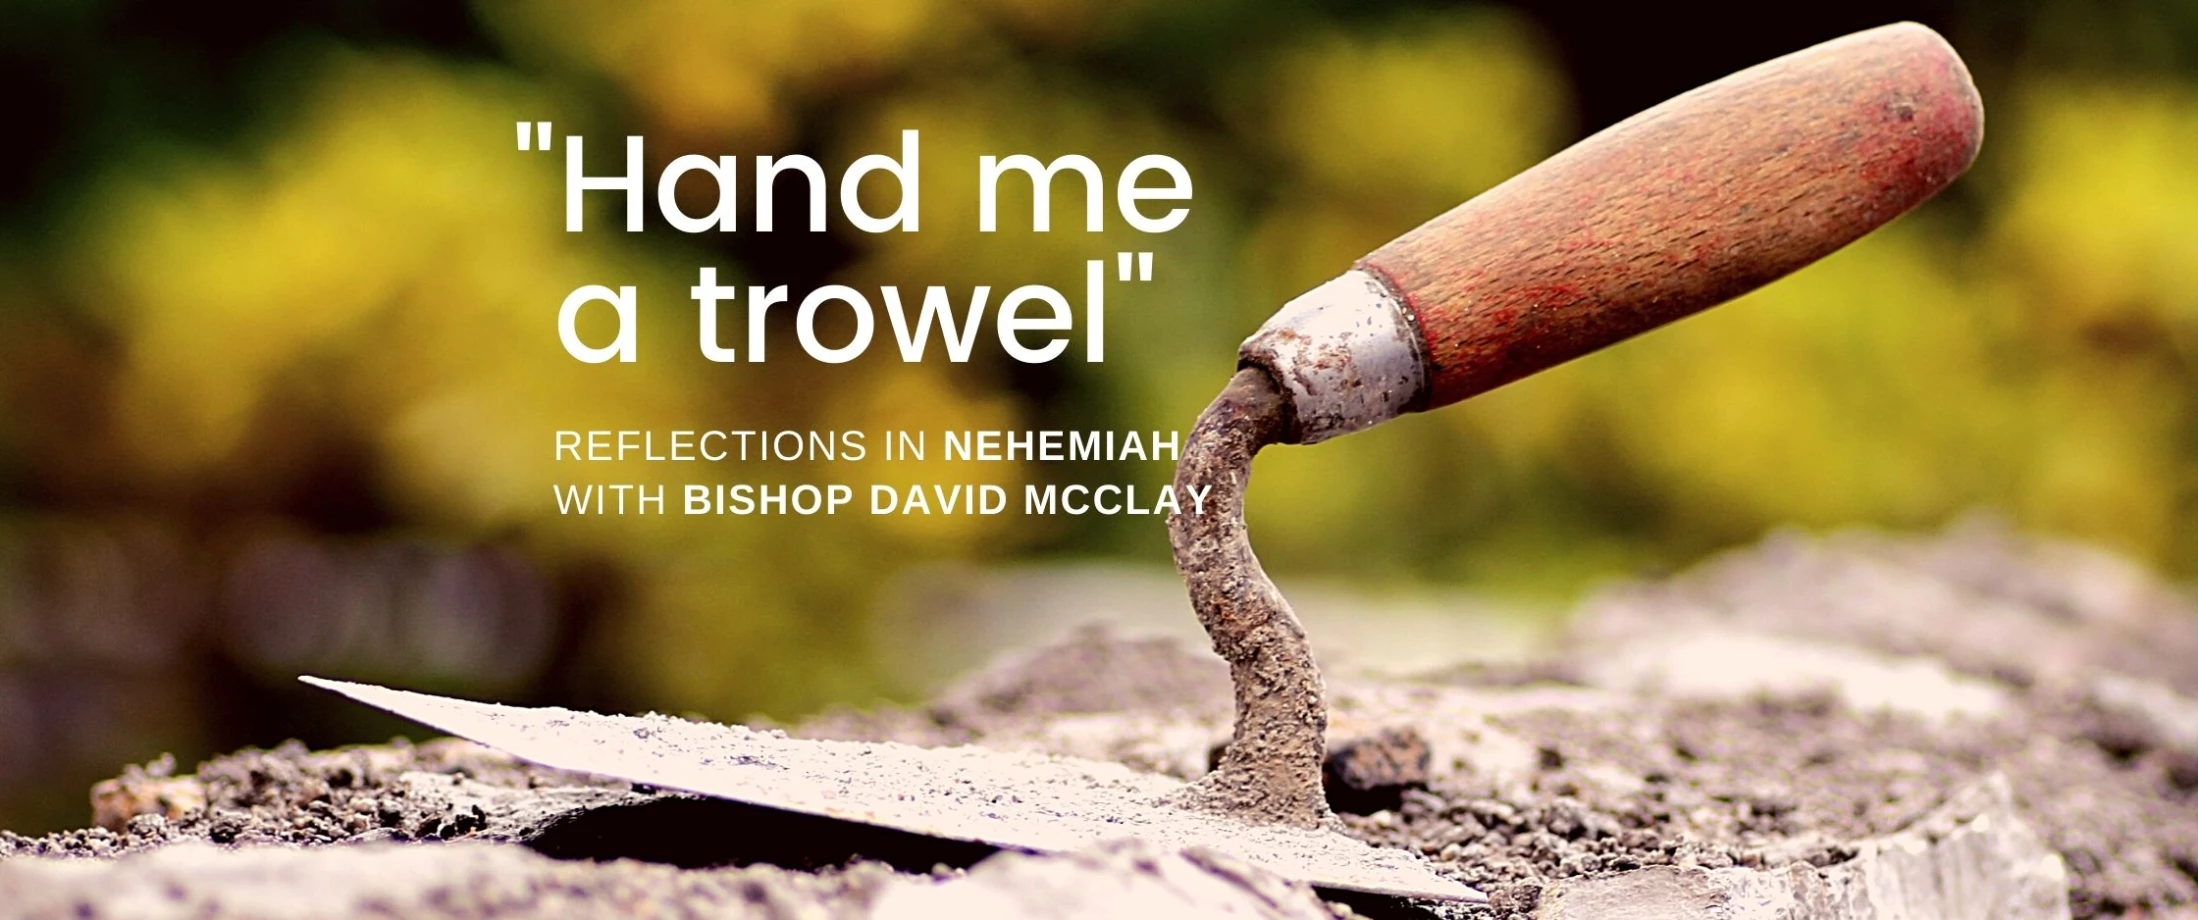 Reflections in Nehemiah for Lent Day 39